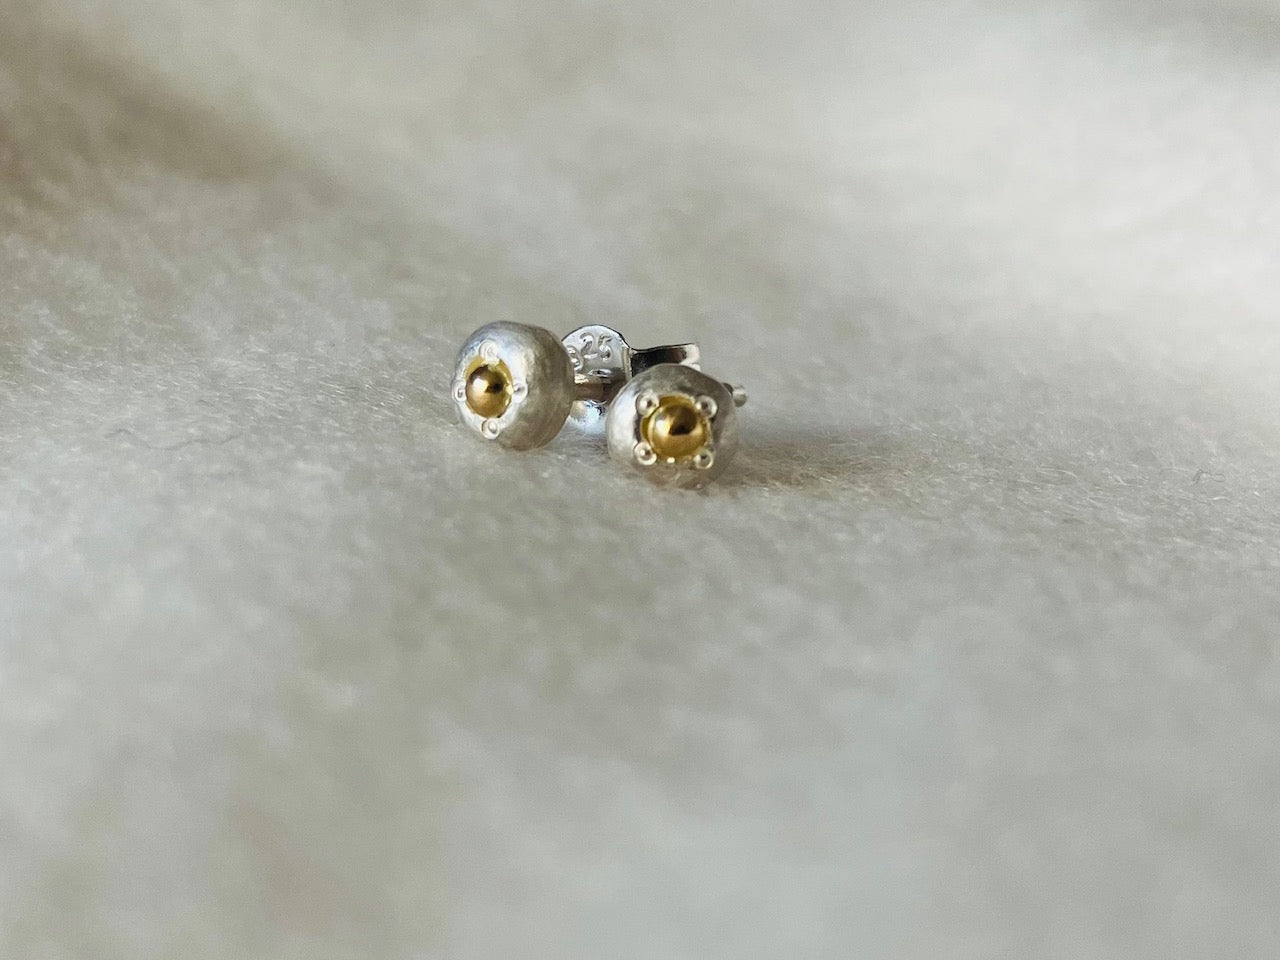 Combination 18K Gold Bead Based on Silver925 Flattened Ball